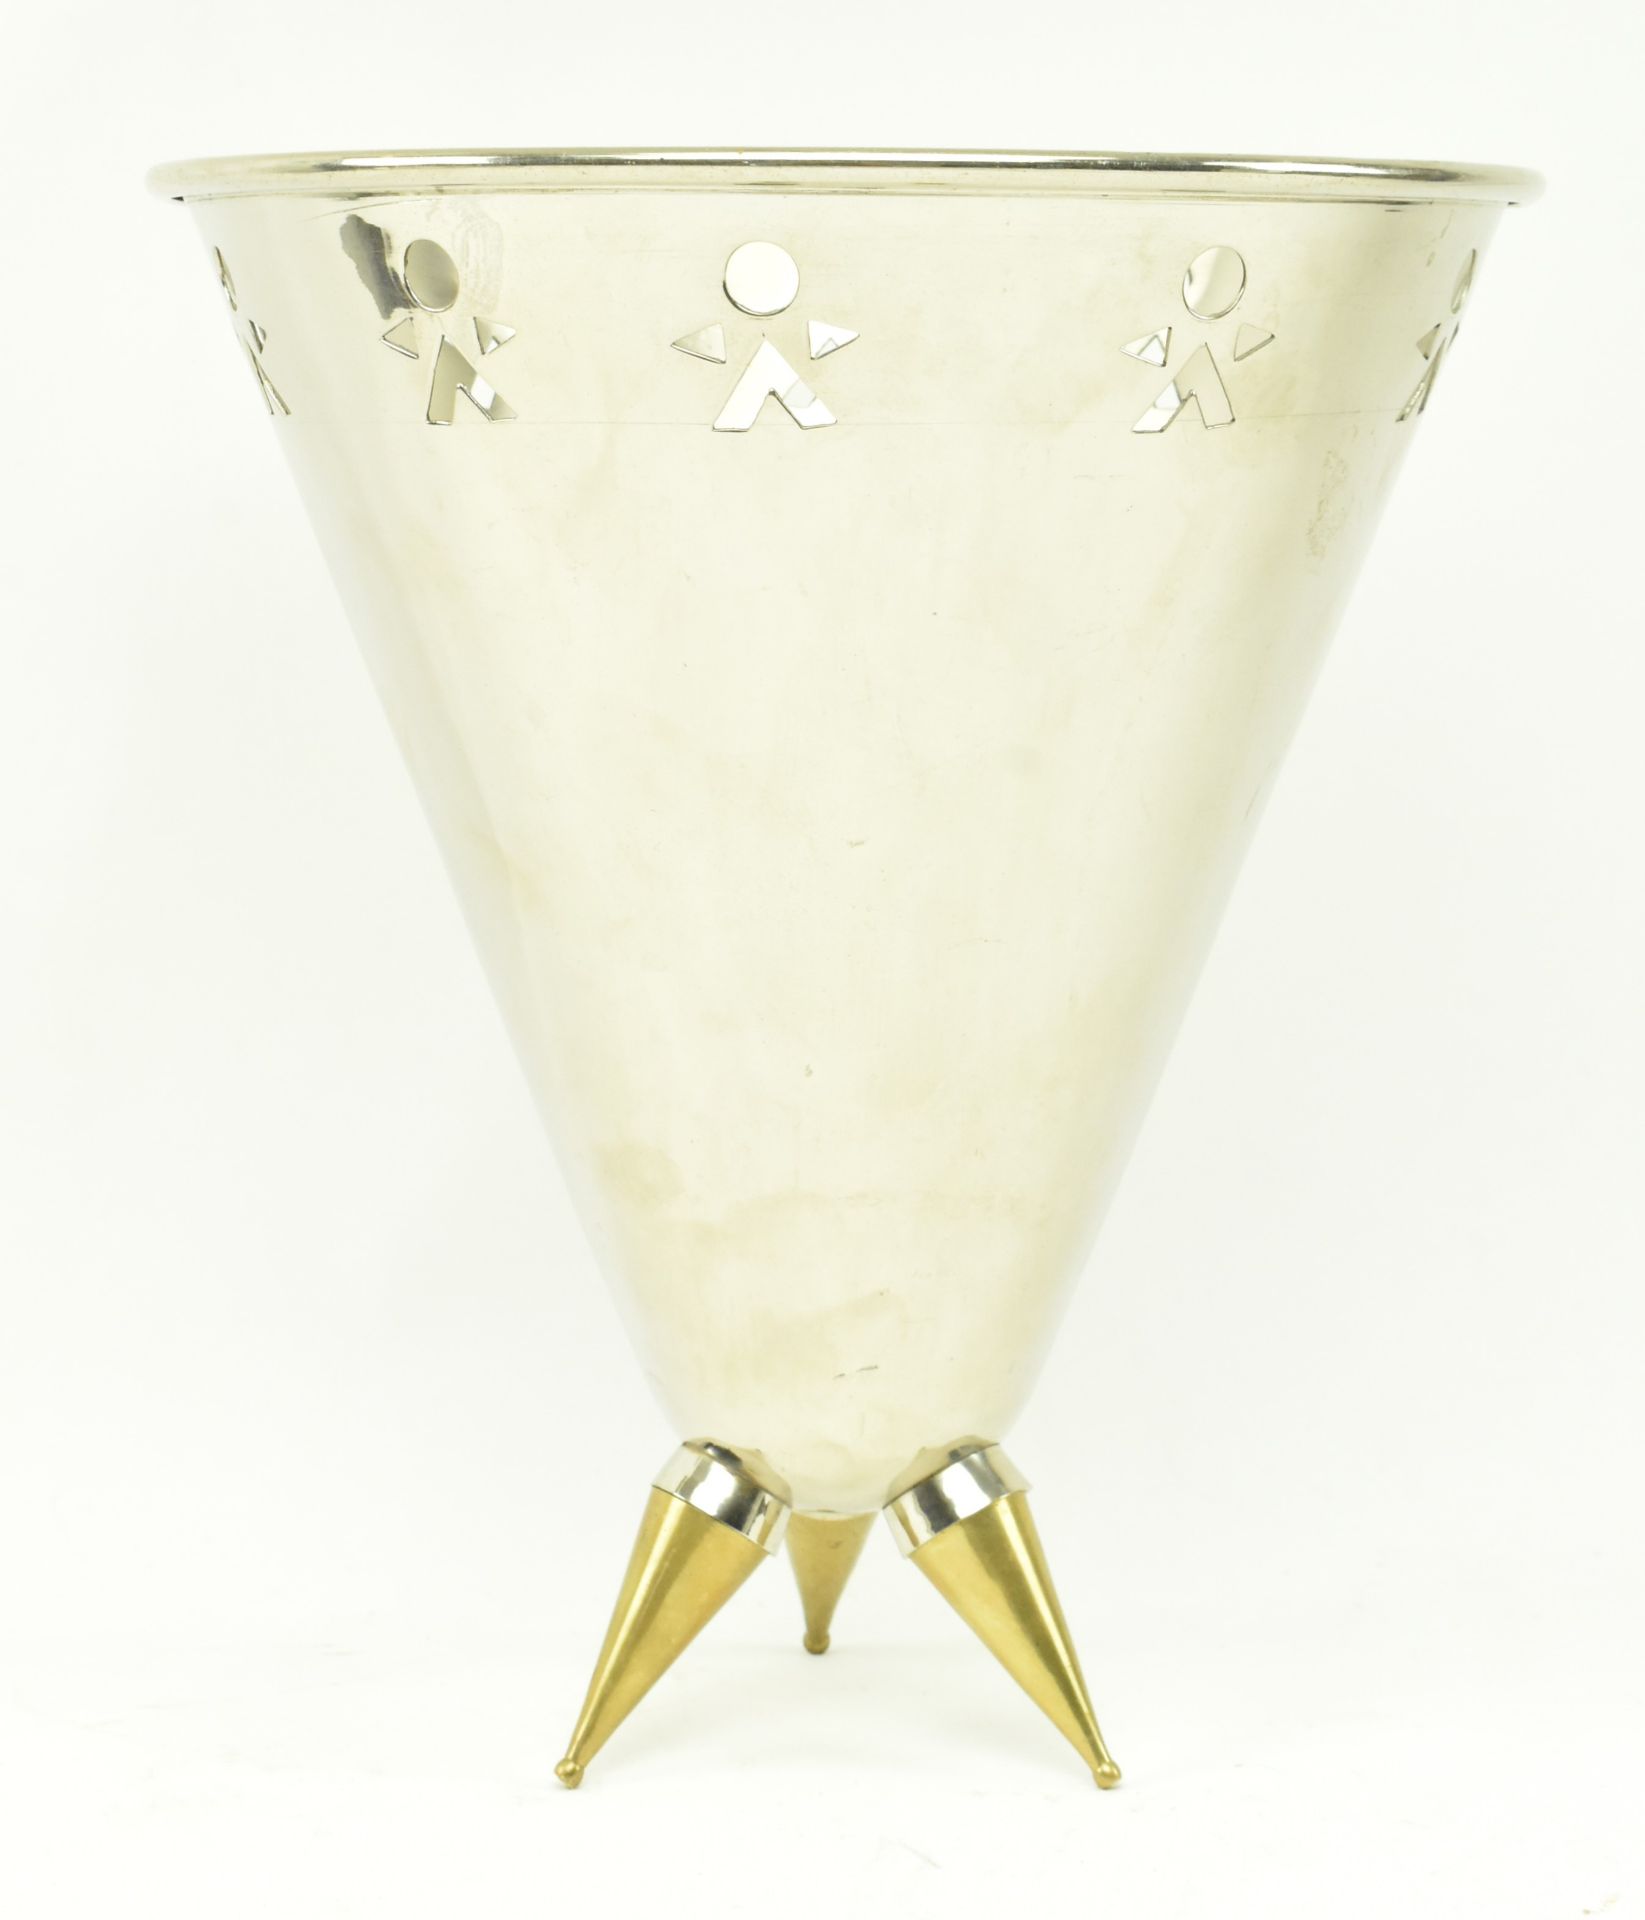 PHILIPPE STARCK (MANNER OF) - LATE 20TH CENTURY COOLER